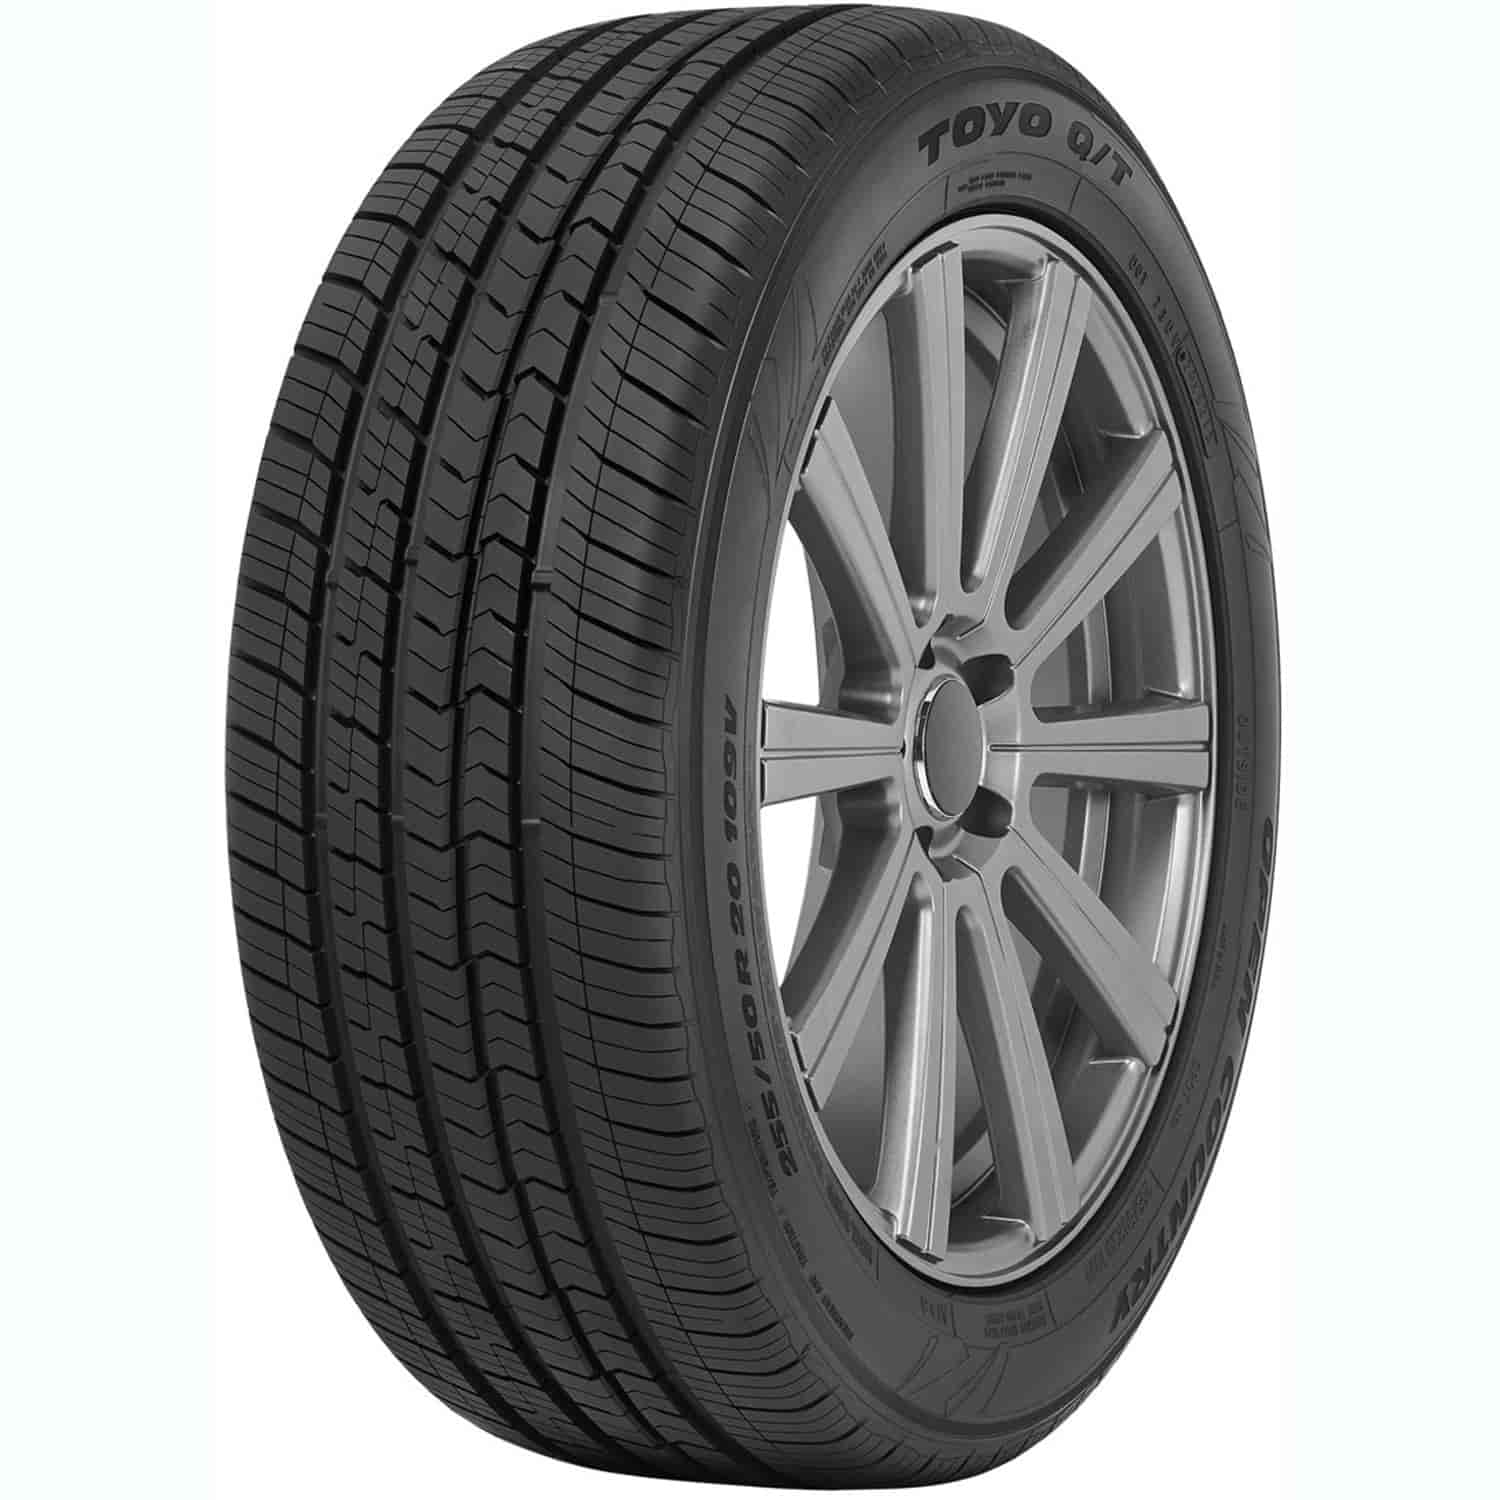 OPEN COUNTRY Q/T P265/65R17 110S